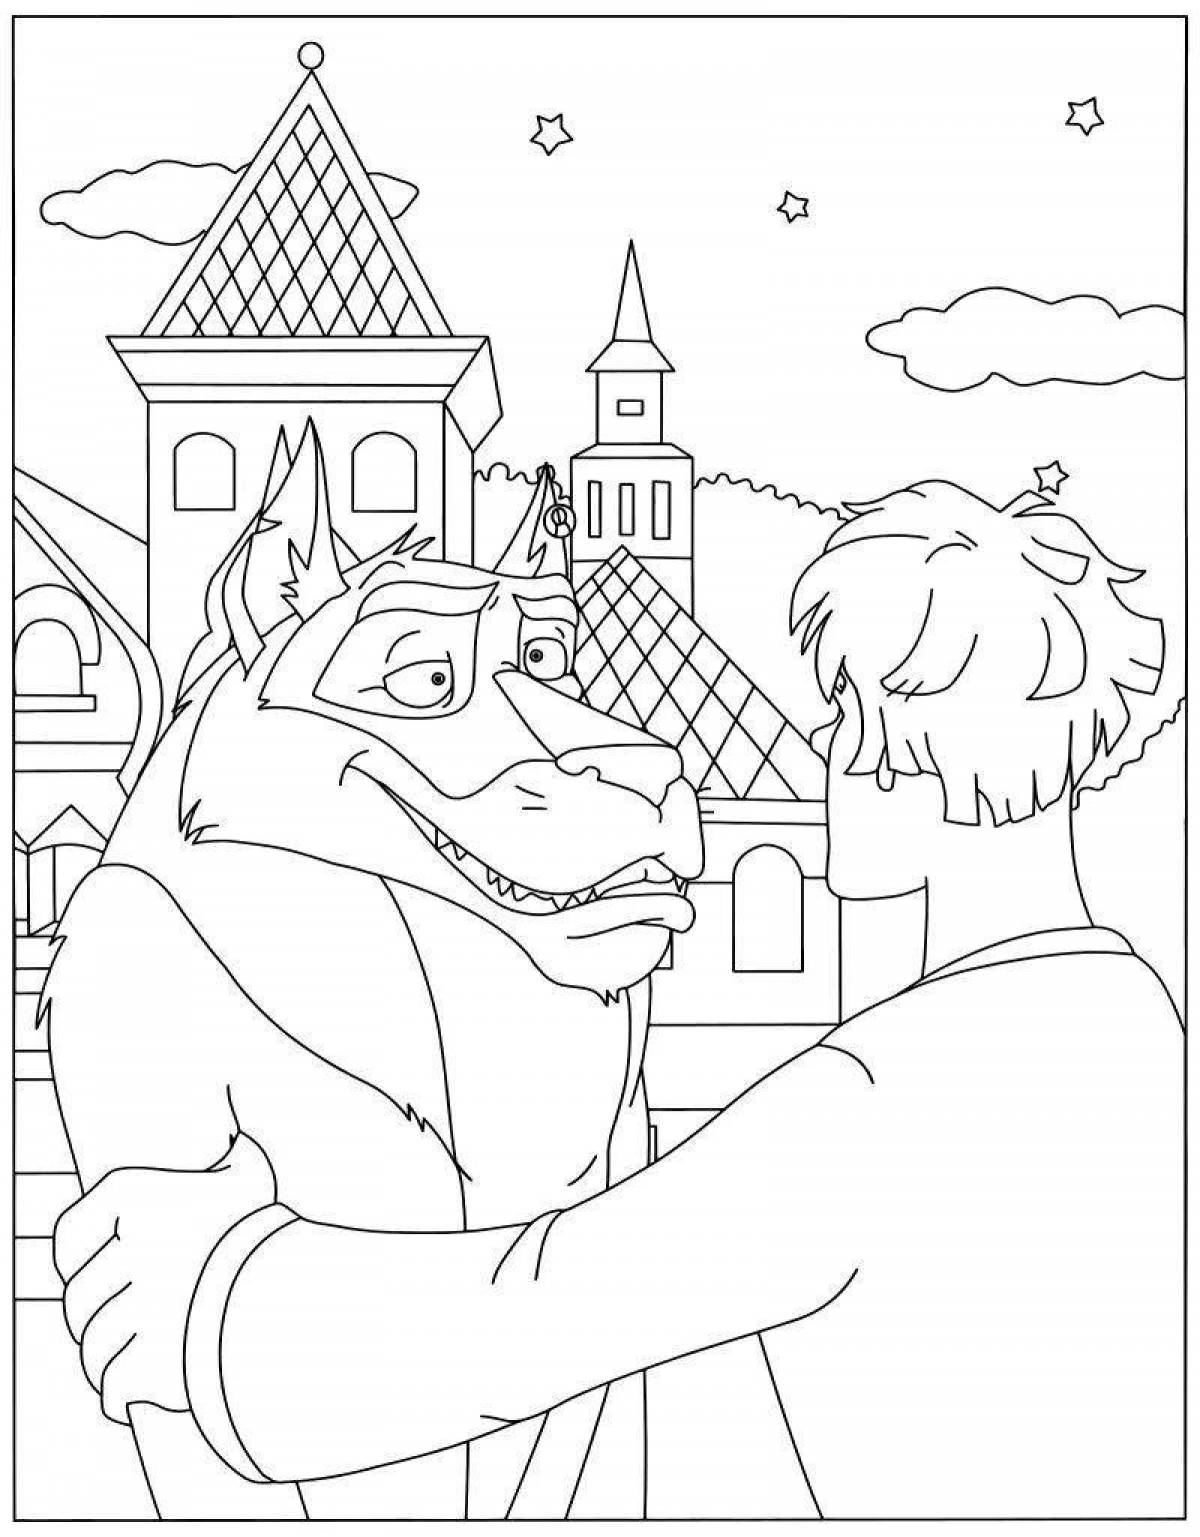 Delightful Ivan Tsarevich and the gray wolf 4 coloring